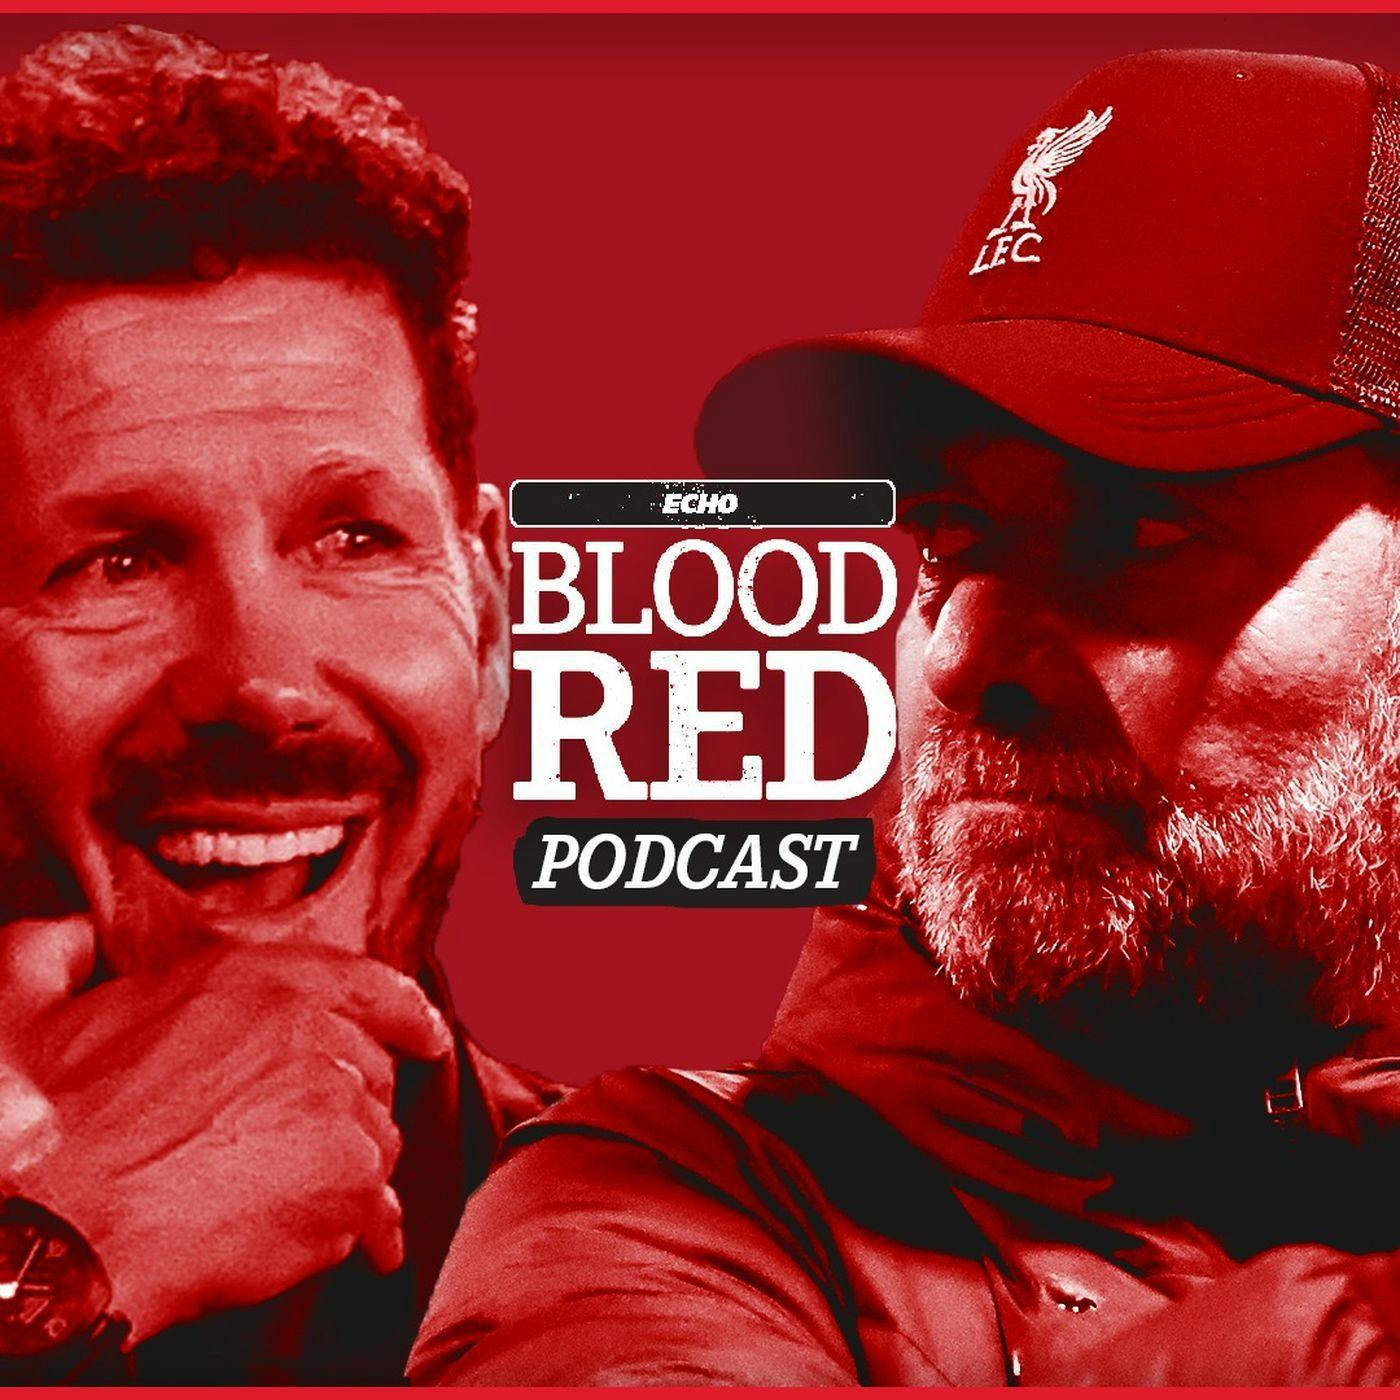 Blood Red: Liverpool renew Diego Simeone rivalry after unravelling against Brighton